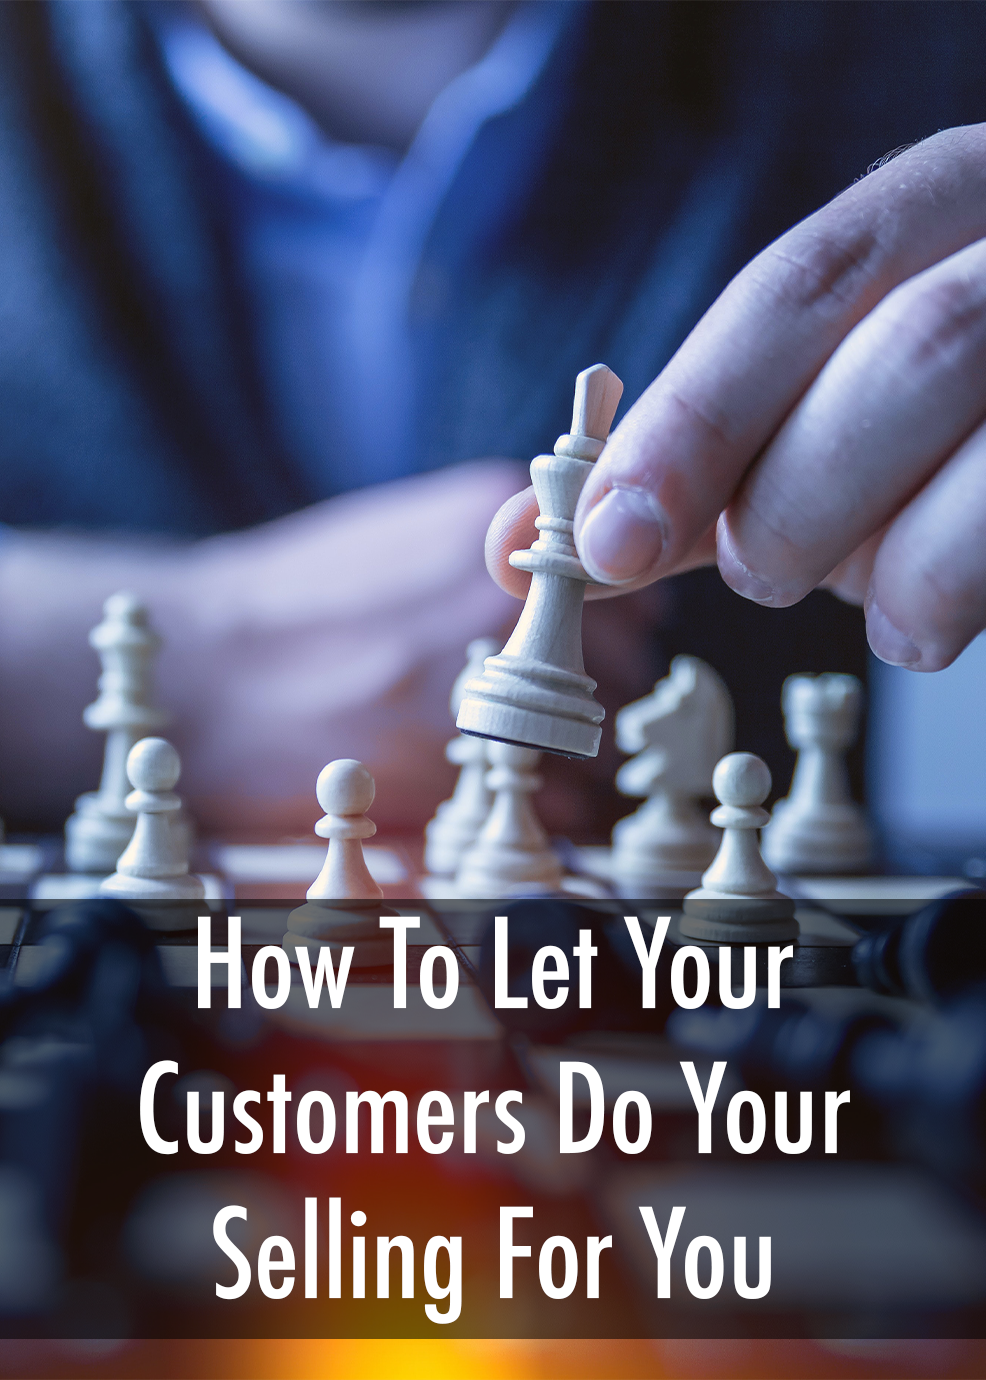 How To Let Your Customers Do Your Selling For You